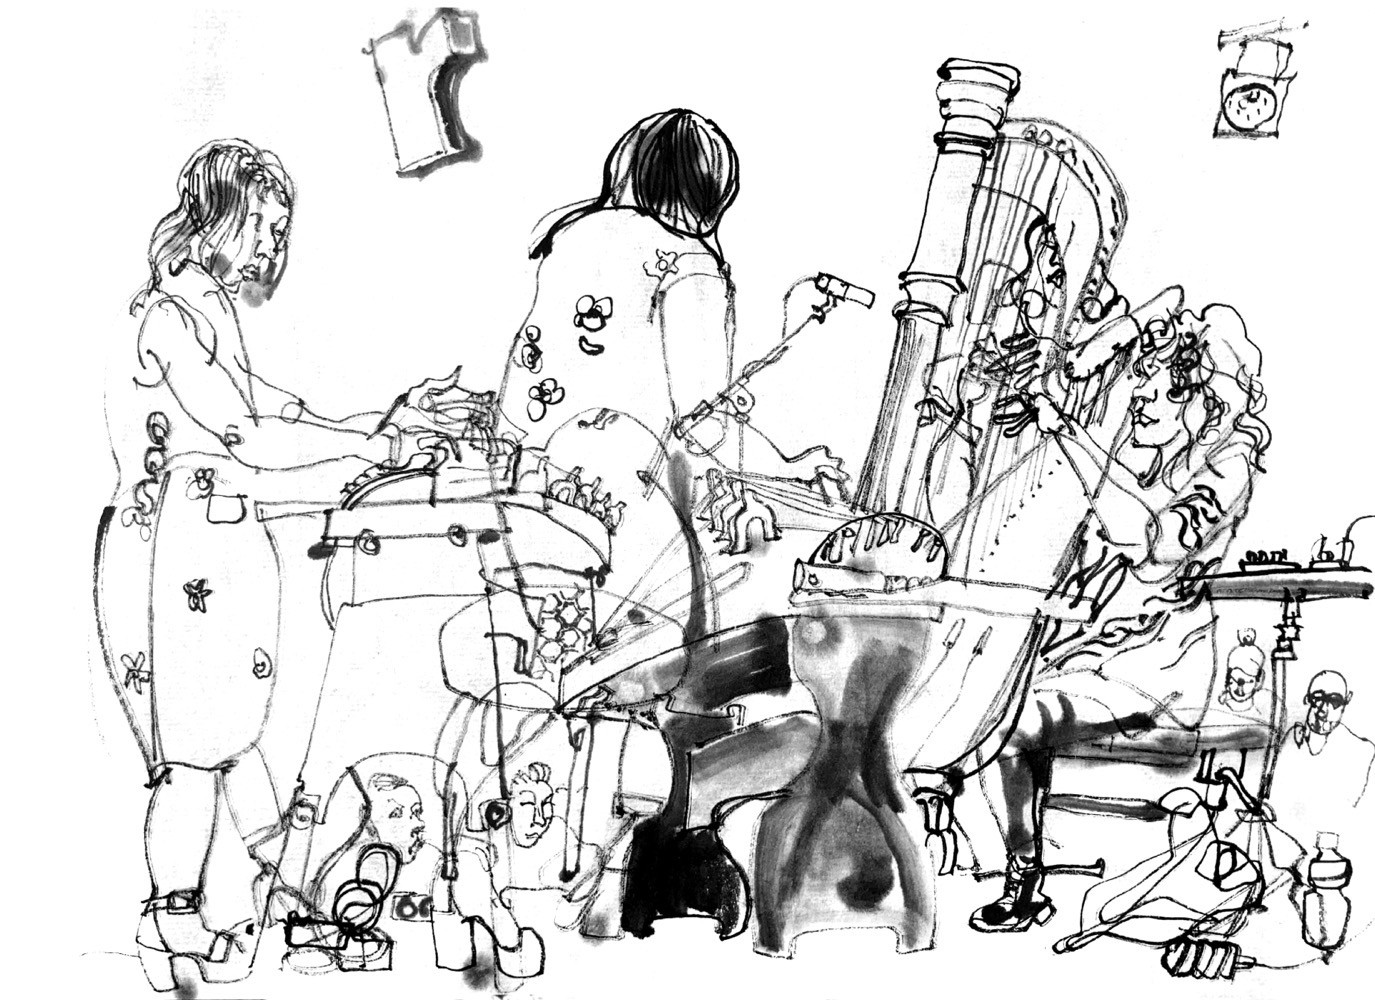 Ink drawingw of two female musicians, a Koto player (depicted twice) and an harp player (depicted twice)